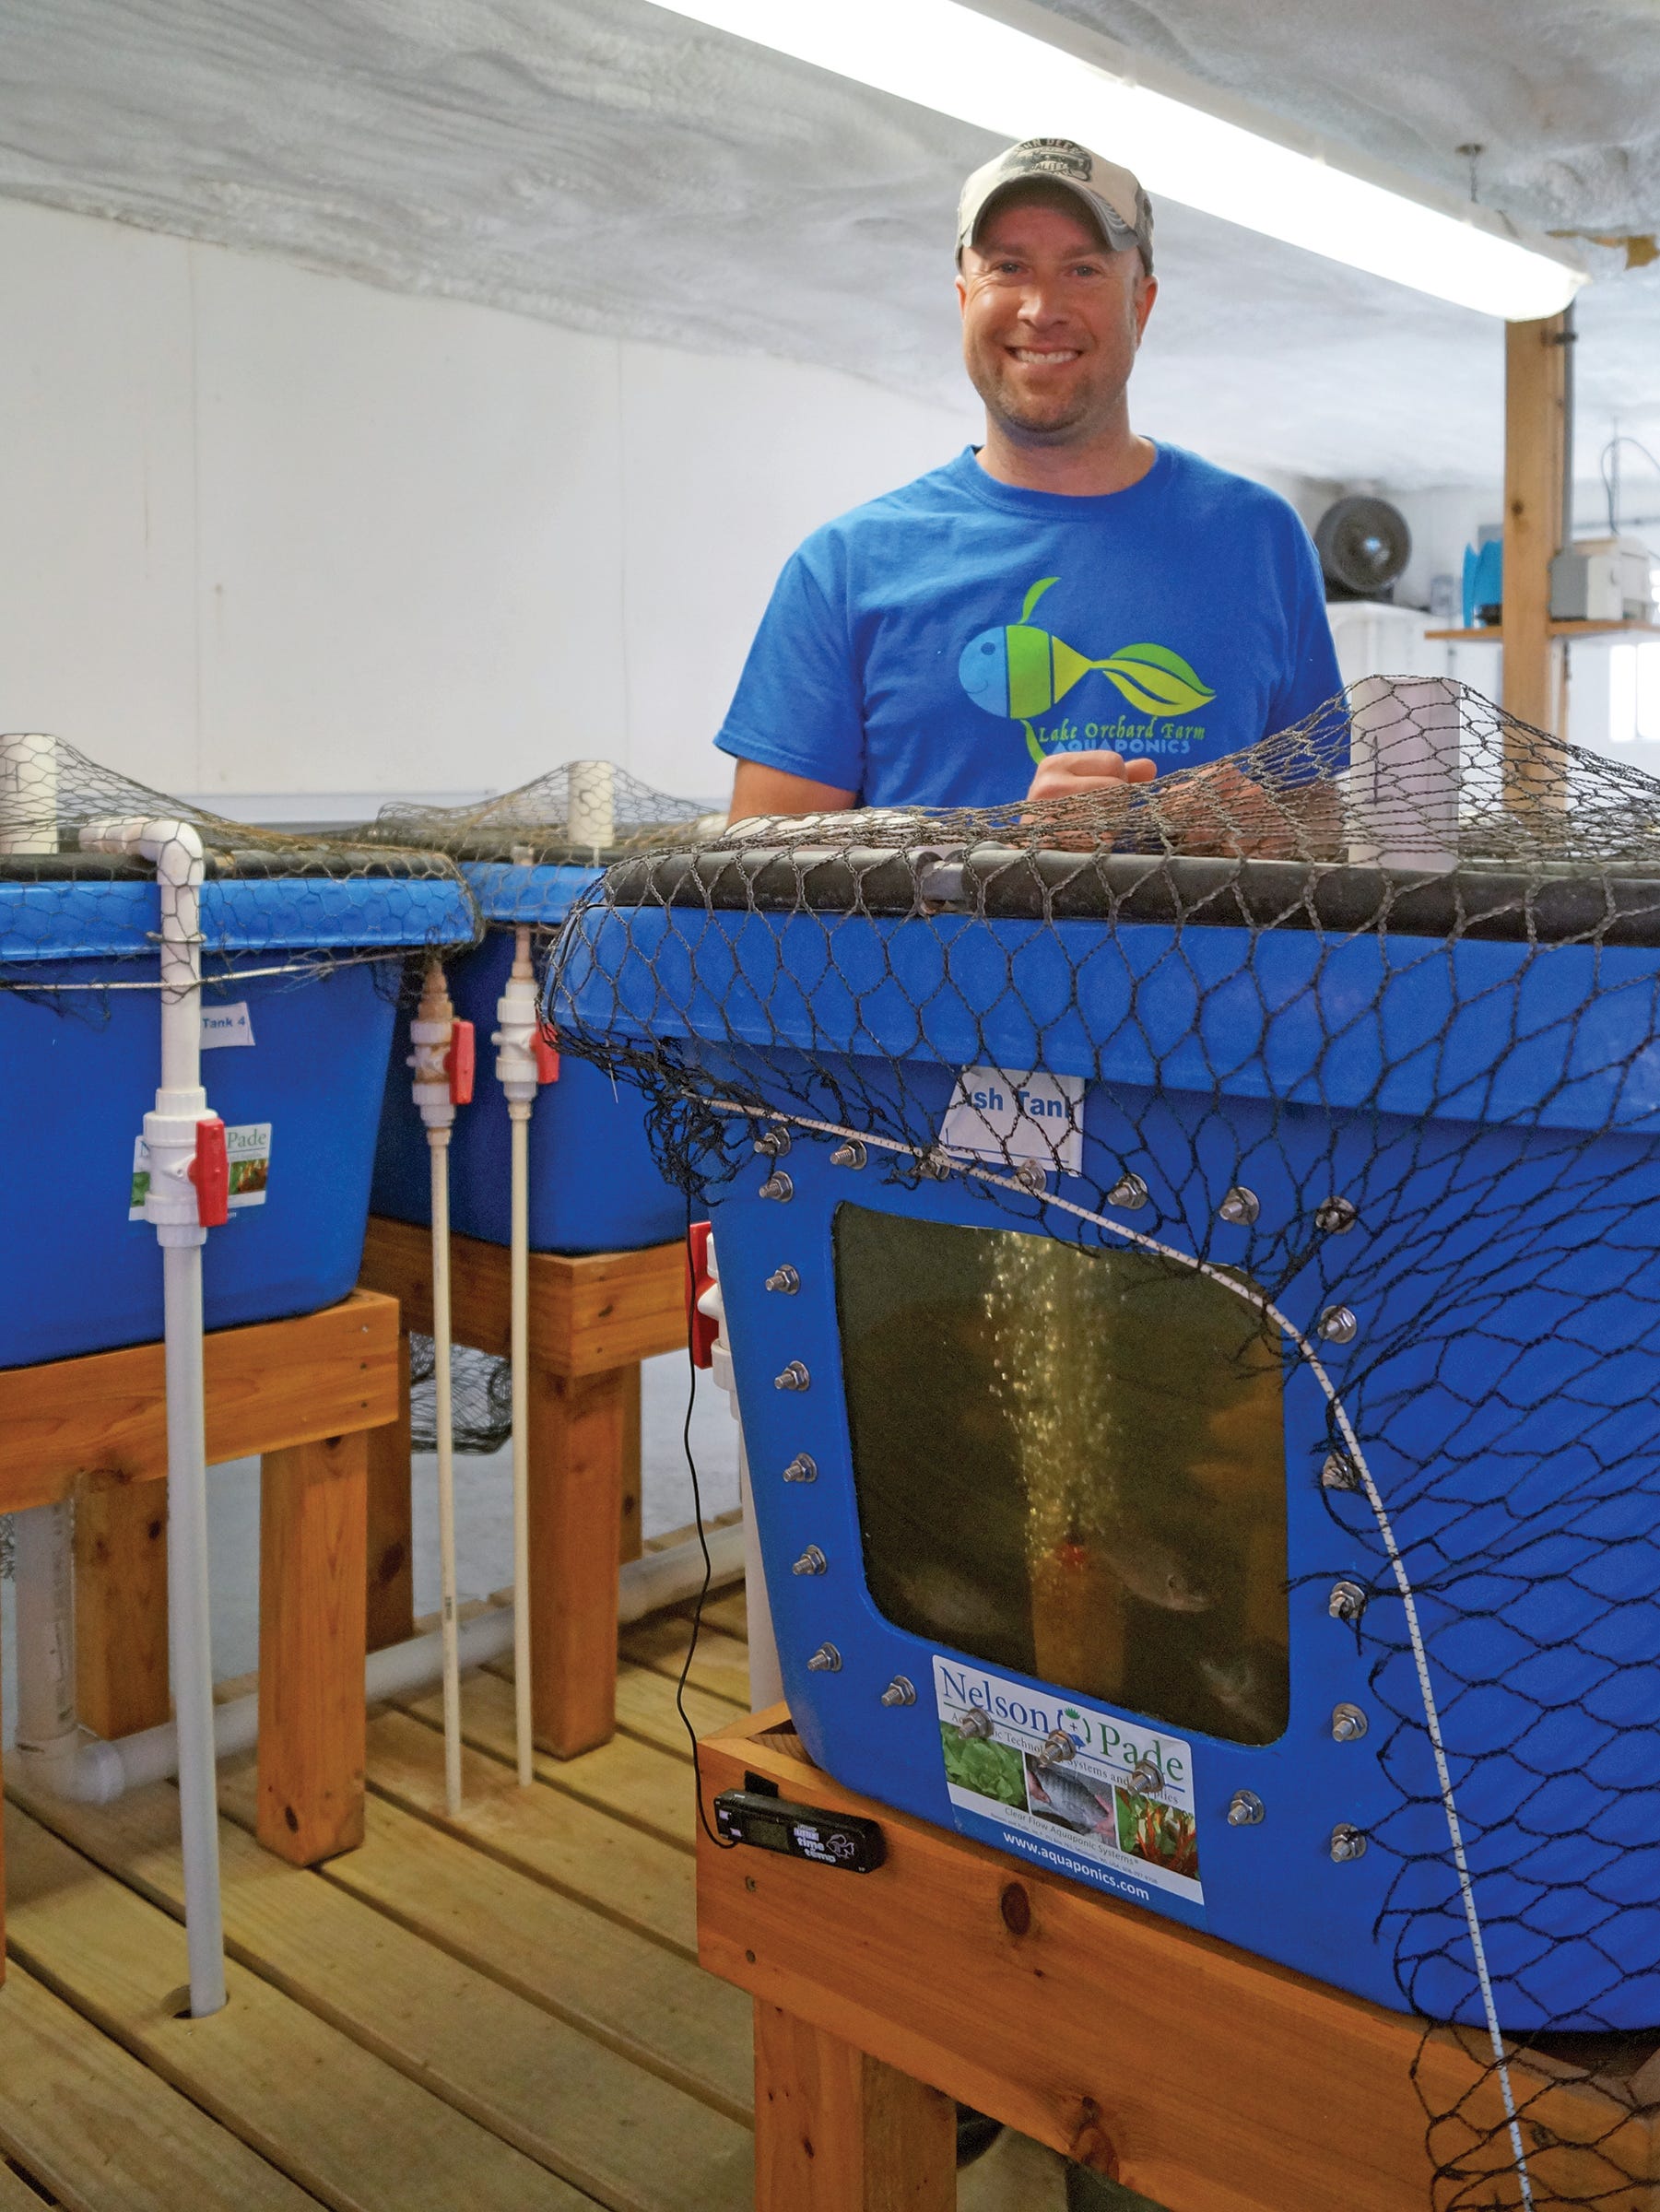 Nate Calkins says that aquaponics attracted him due to its stability and sustainability.